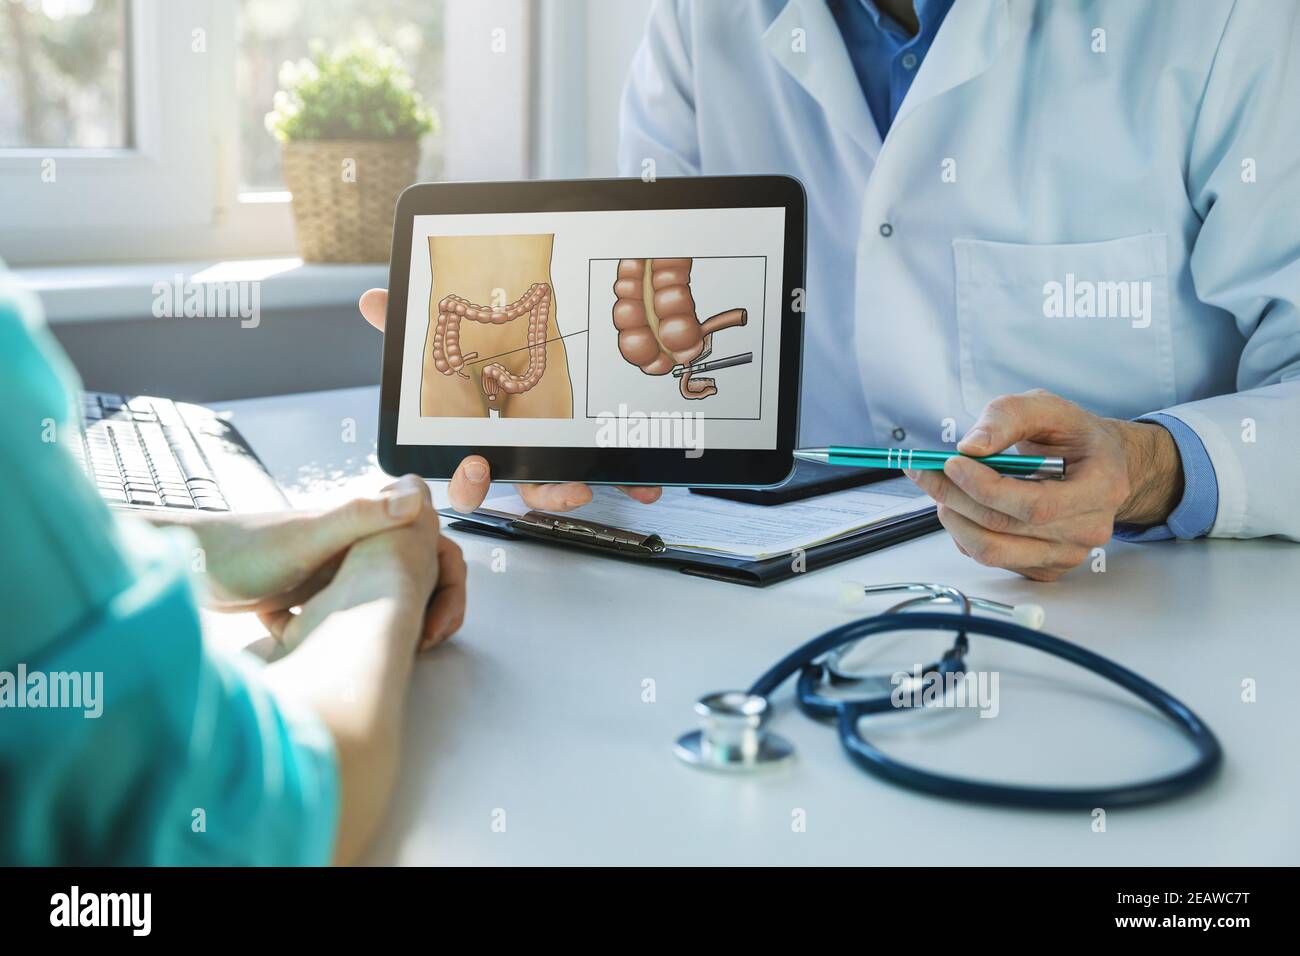 appendectomy - doctor and patient talking about planned appendix removal surgery in clinics office Stock Photo